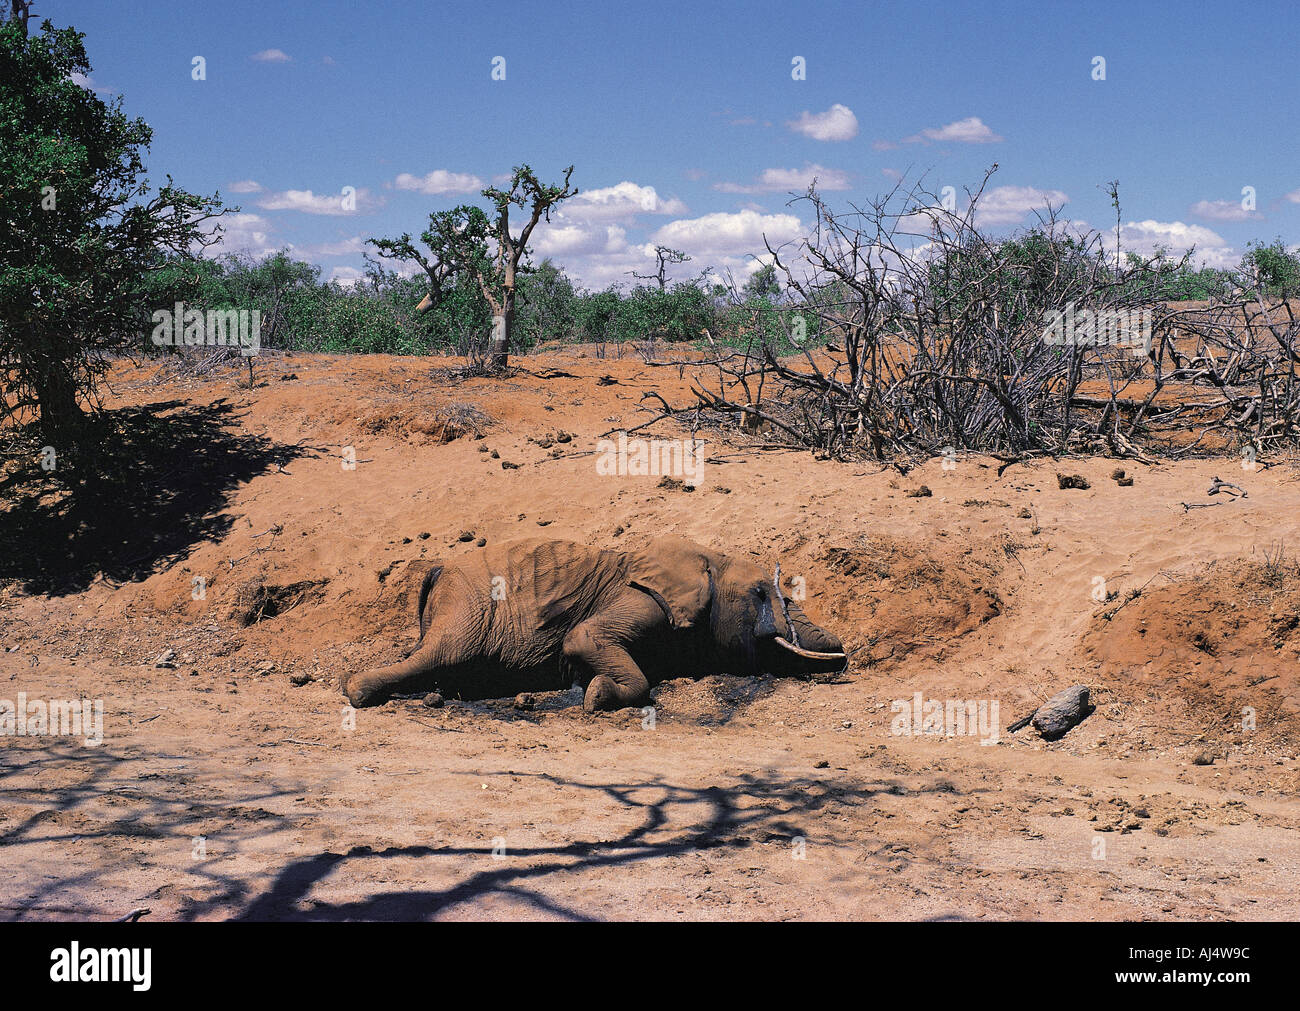 Dead elephant which has died of starvation Tsavo East National Park Kenya East Africa Stock Photo